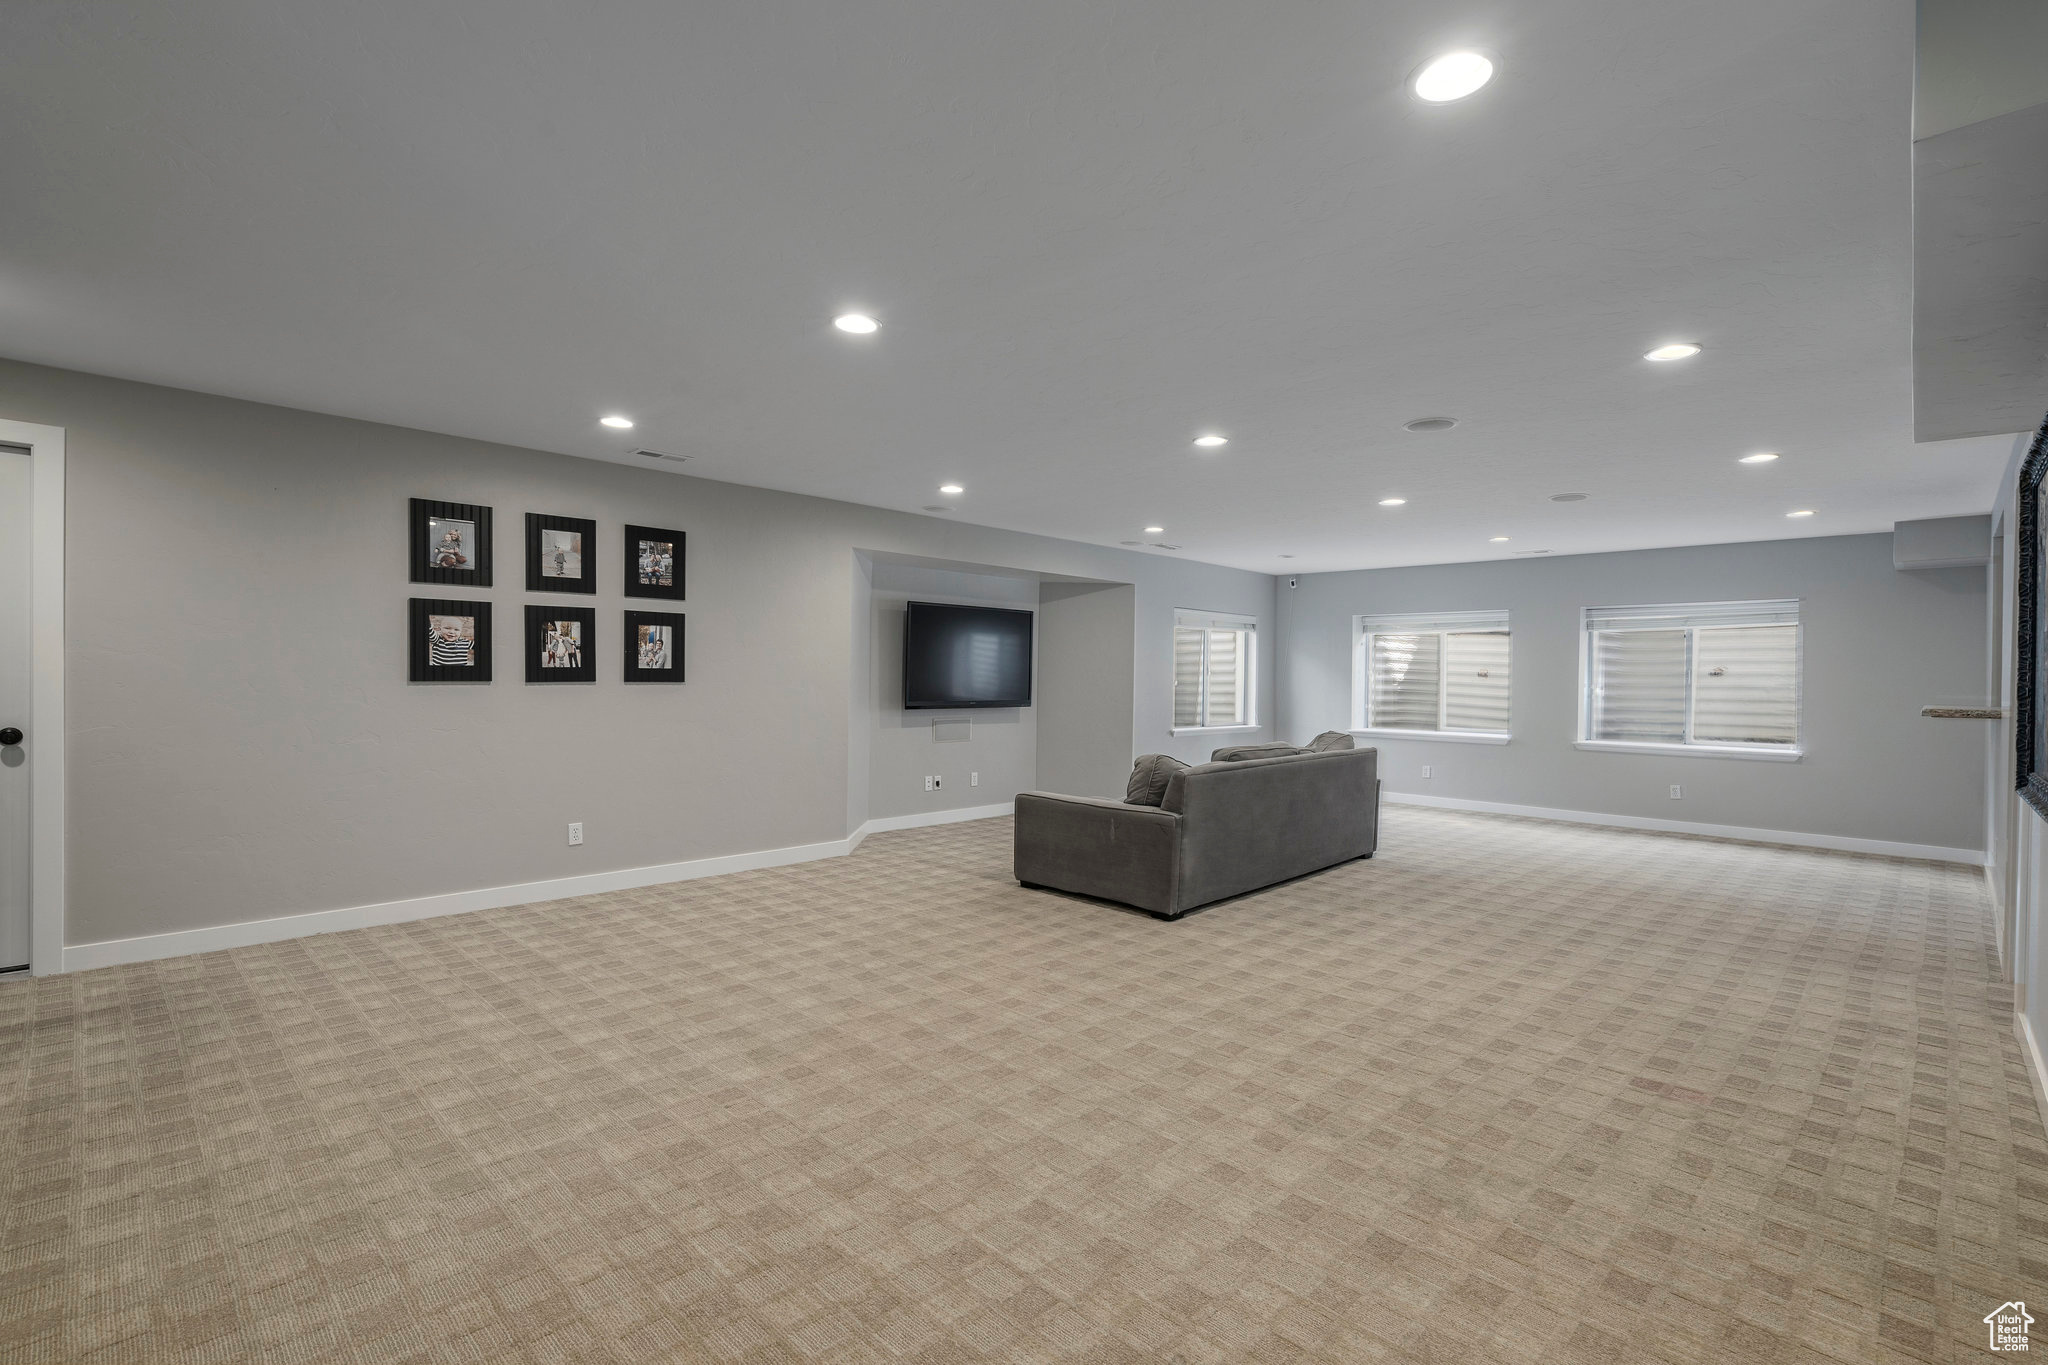 Huge basement living room featuring light colored carpet and a ton of natural light